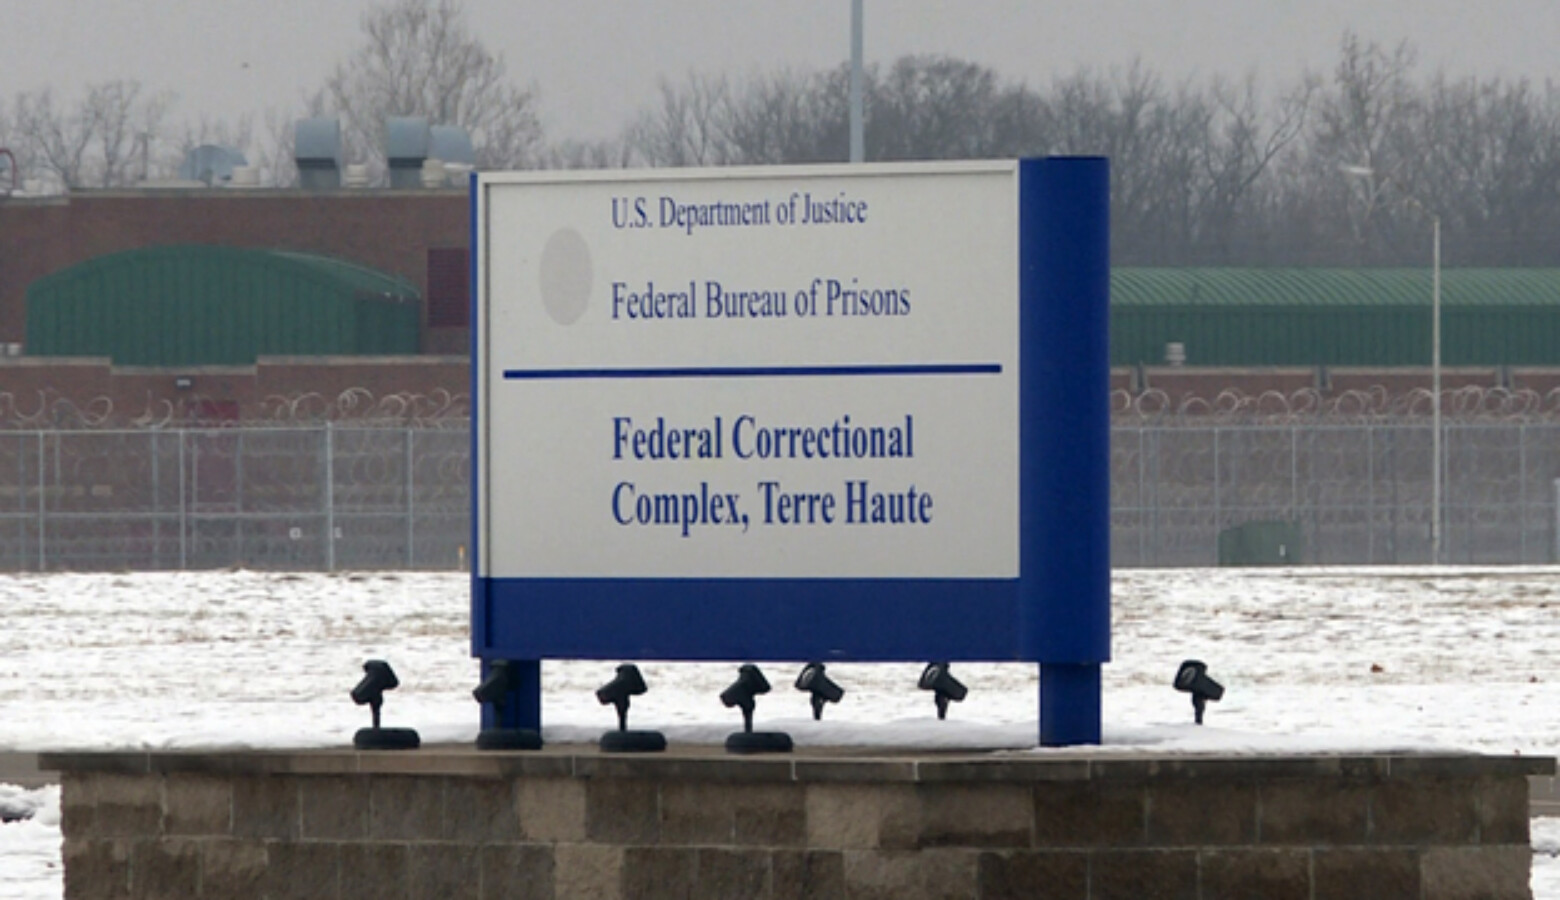 The Department of Justice alleges NaphCare, Inc. charged taxpayers for higher-cost services than those provided by physicians at the federal prison in Terre Haute. (WFIU/WTIU)